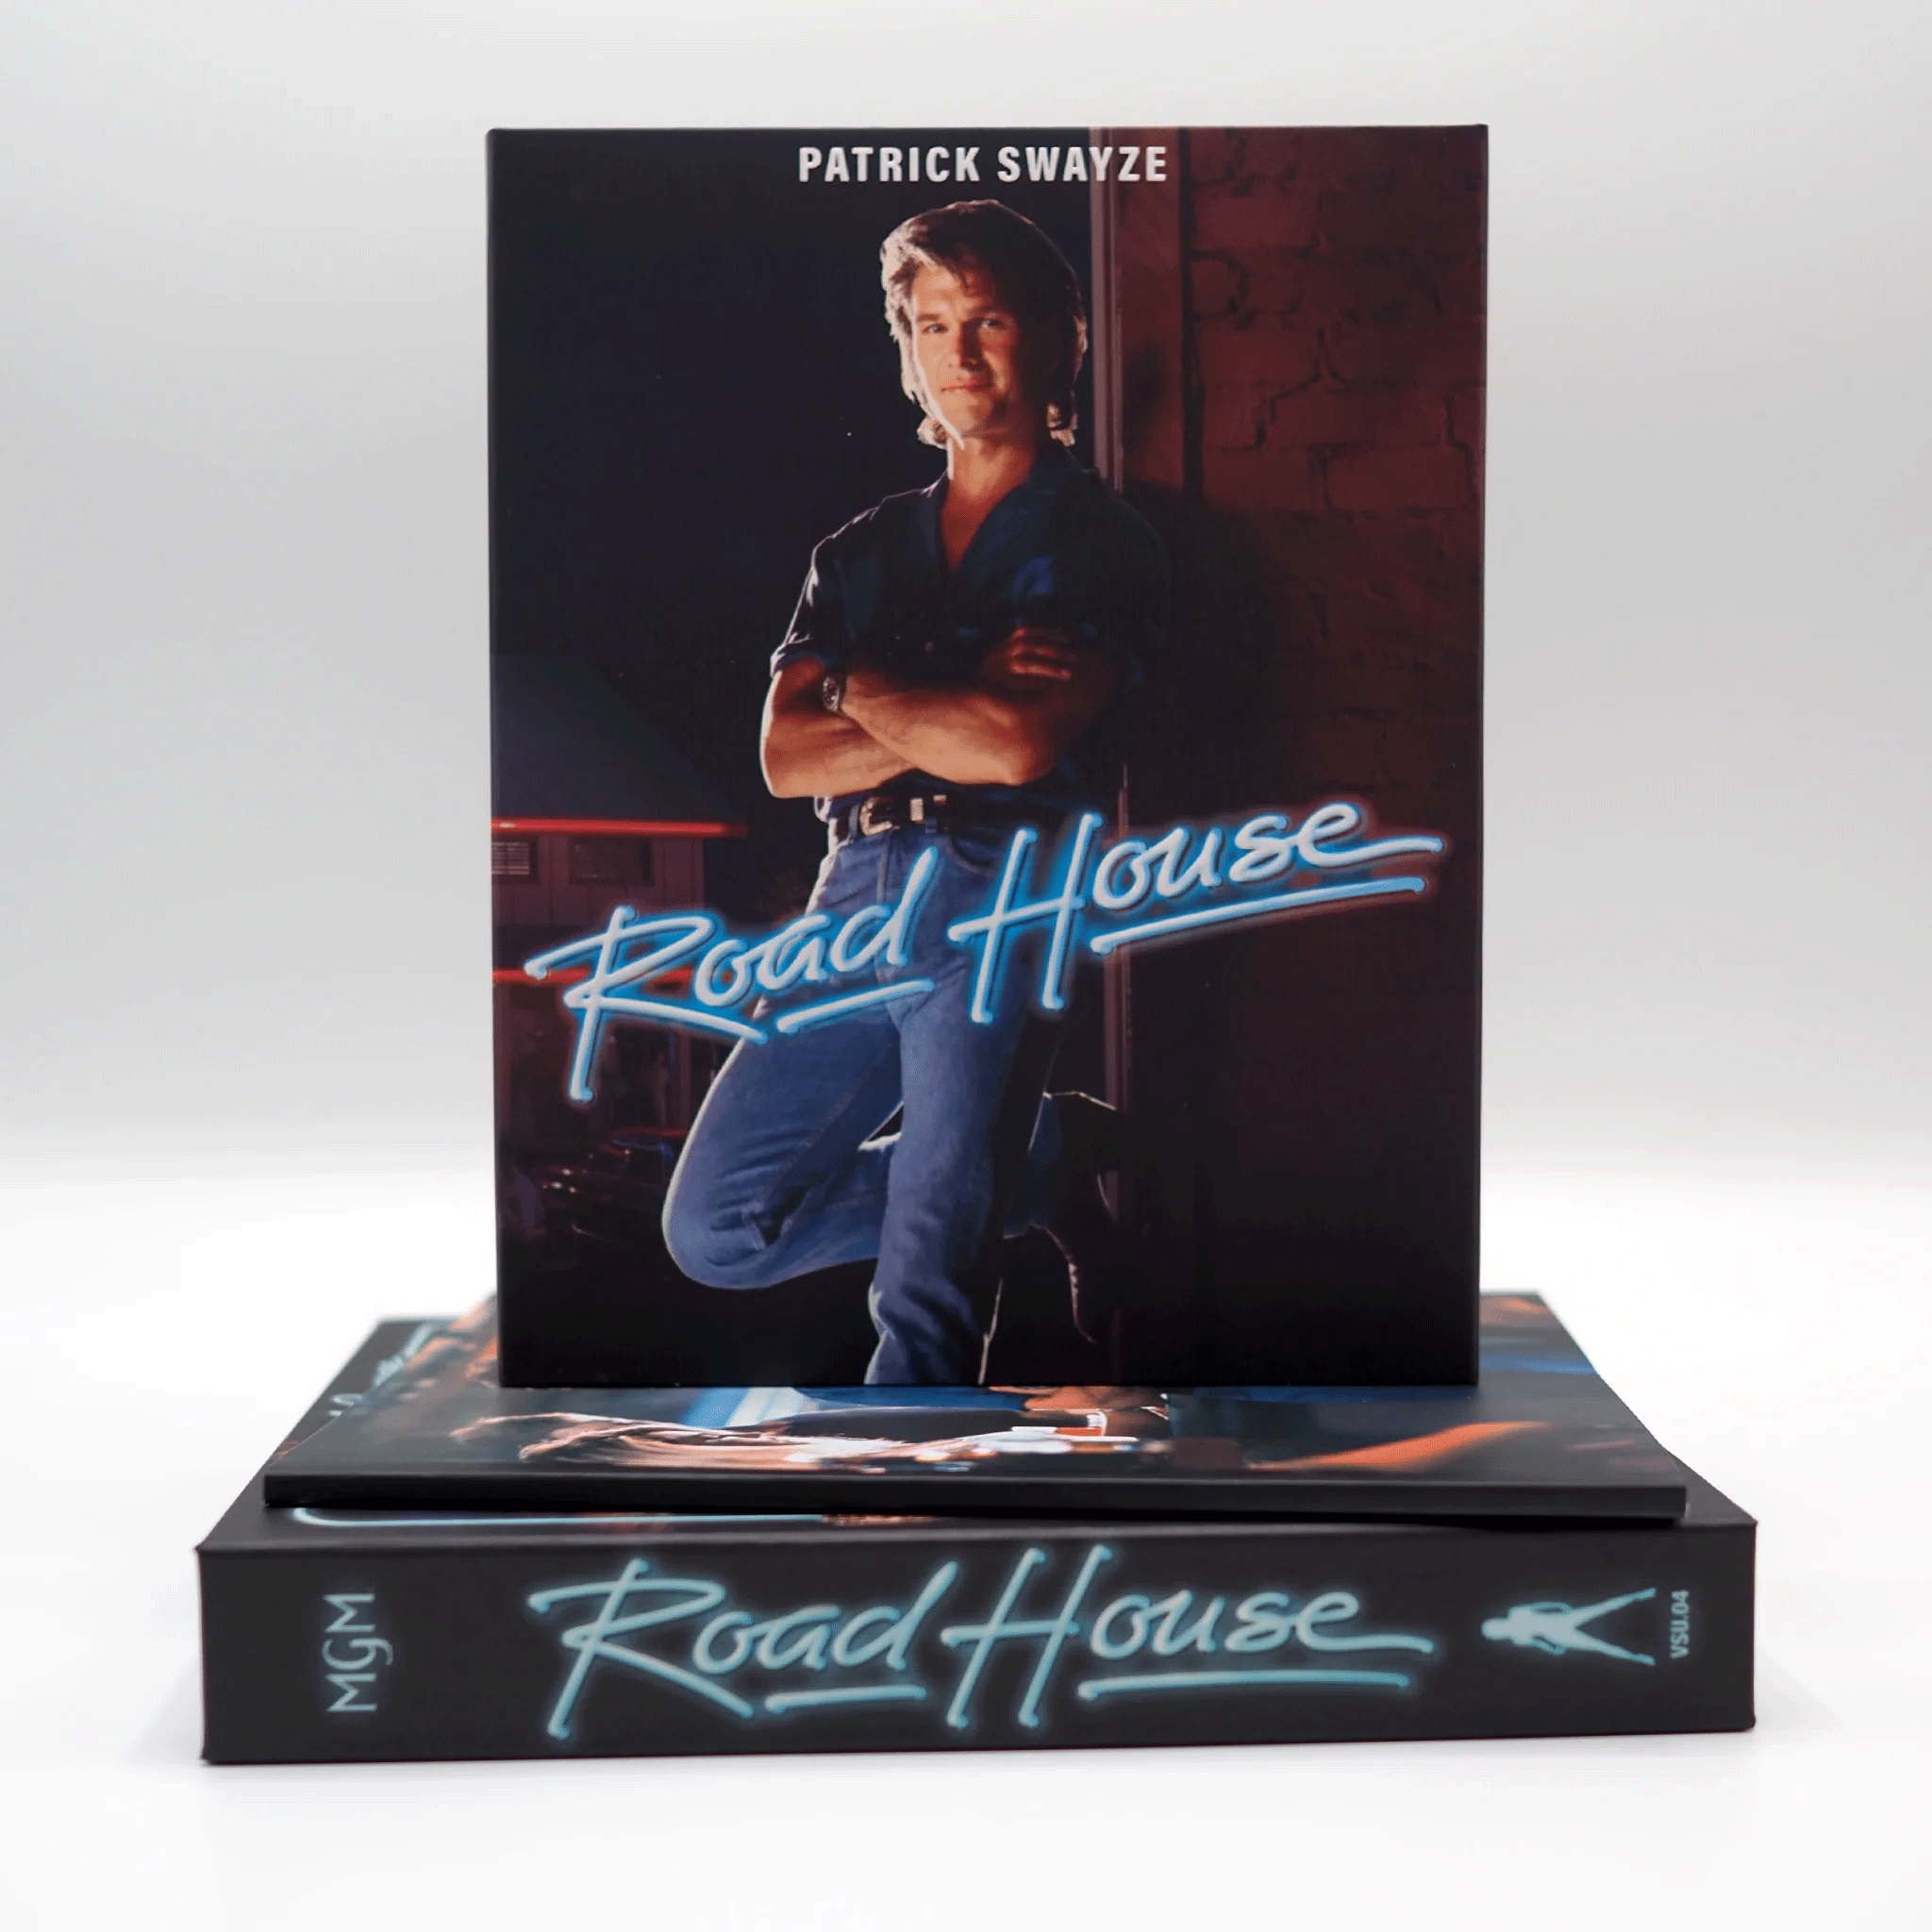 ROAD HOUSE - 4K ULTRA HD / BLU-RAY (LIMITED EDITION) - OOP